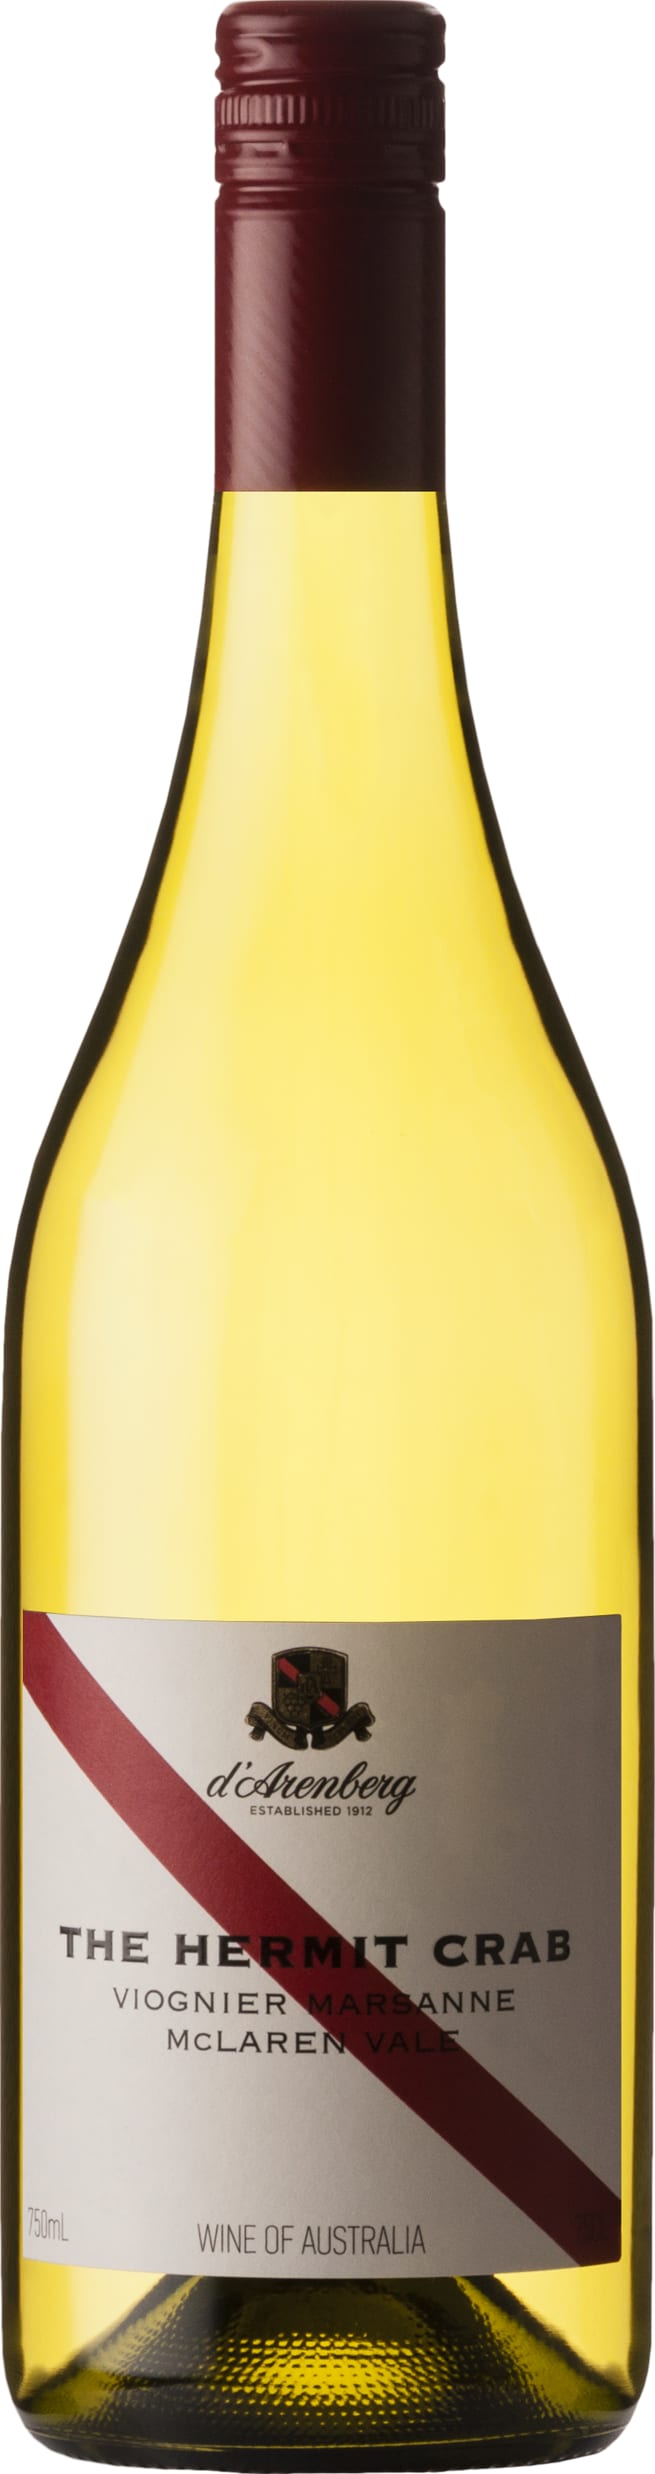 D Arenberg The Hermit Crab Viognier-Marsanne 2022 75cl - Buy D Arenberg Wines from GREAT WINES DIRECT wine shop